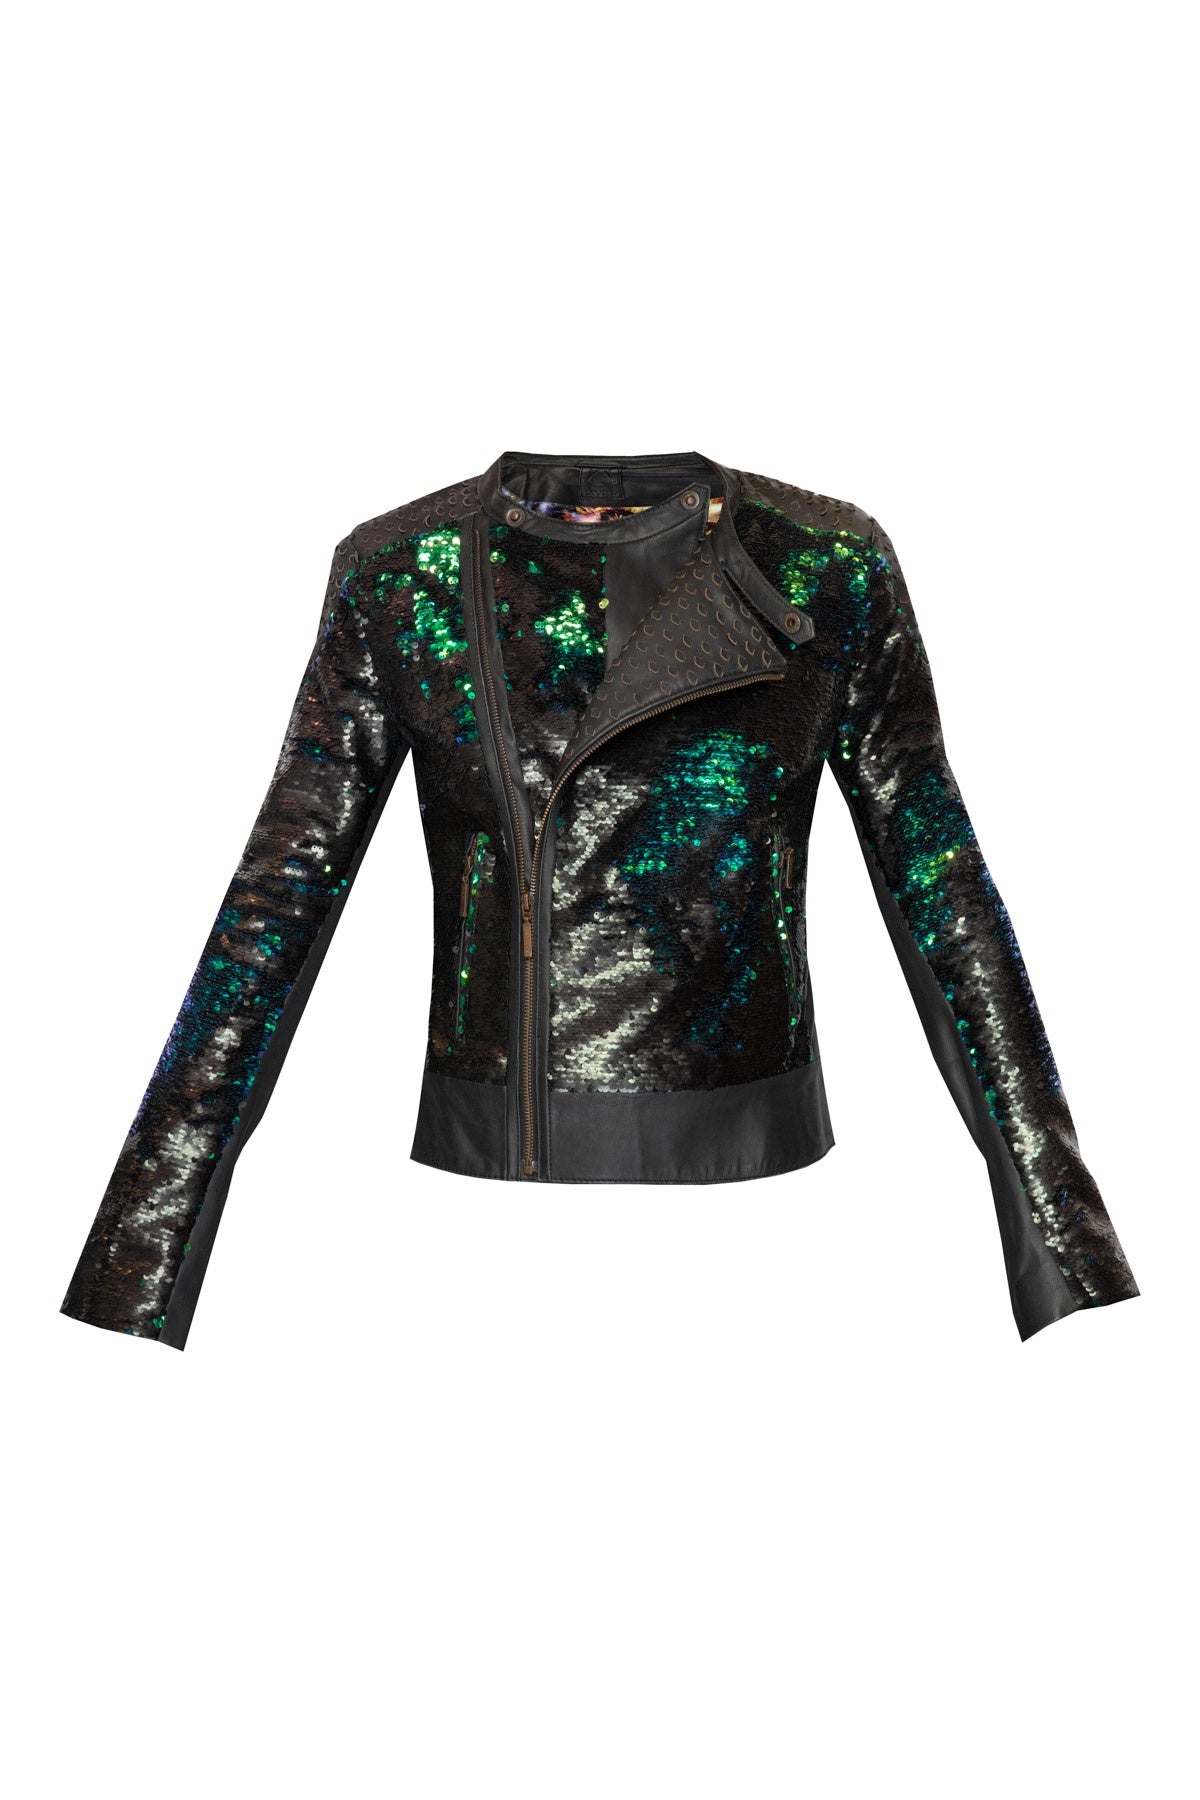 Leather & Green Sequin Jacket